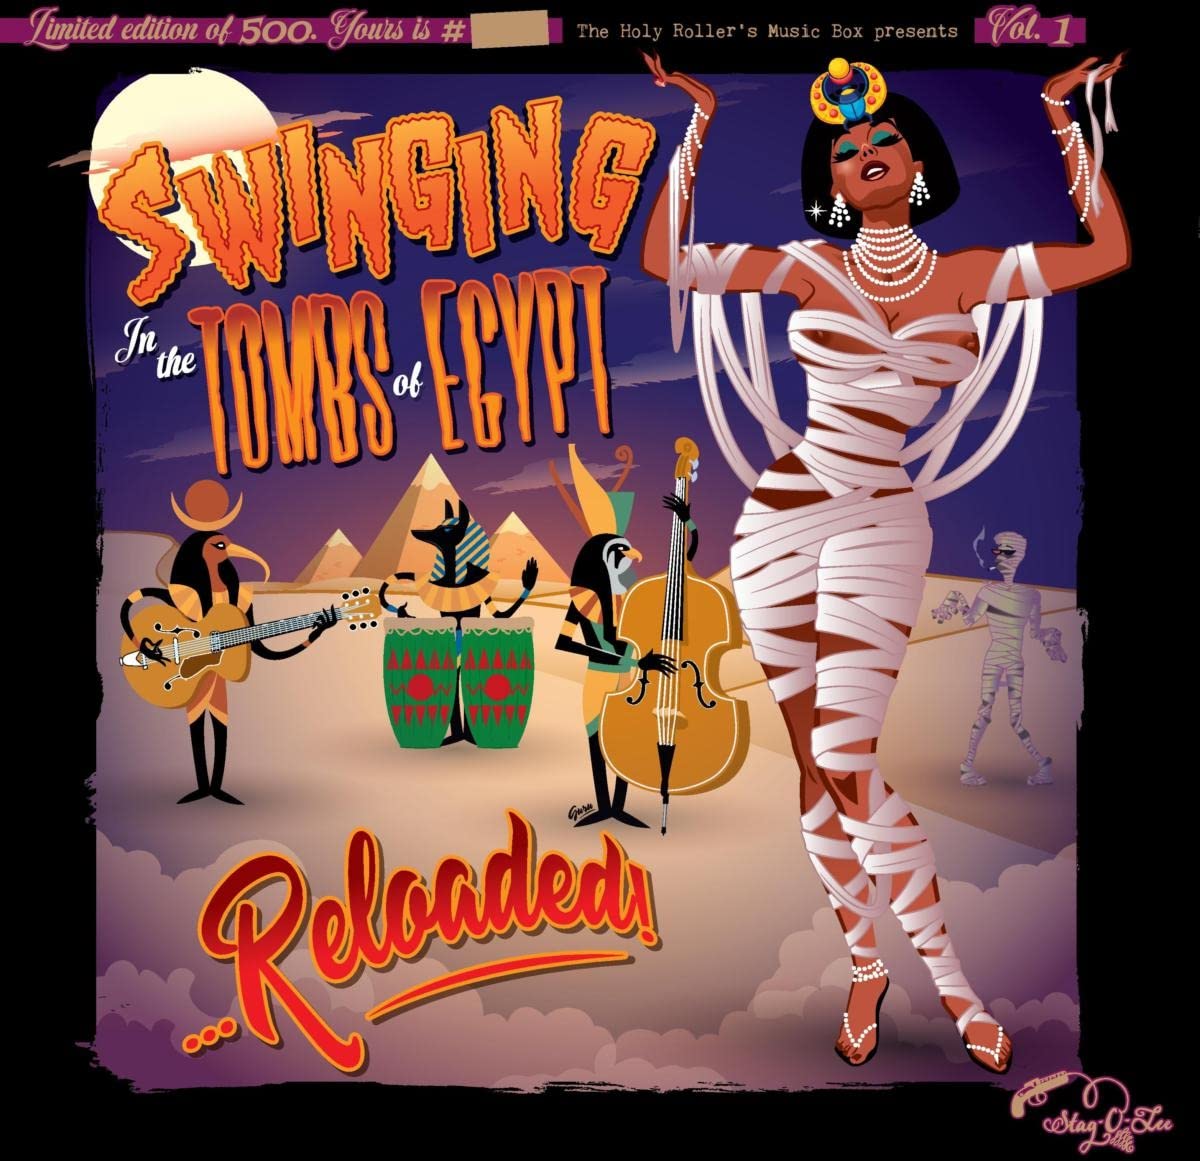 Swinging in the Tombs of Egypt 01 (Limited) [Vinyl LP]